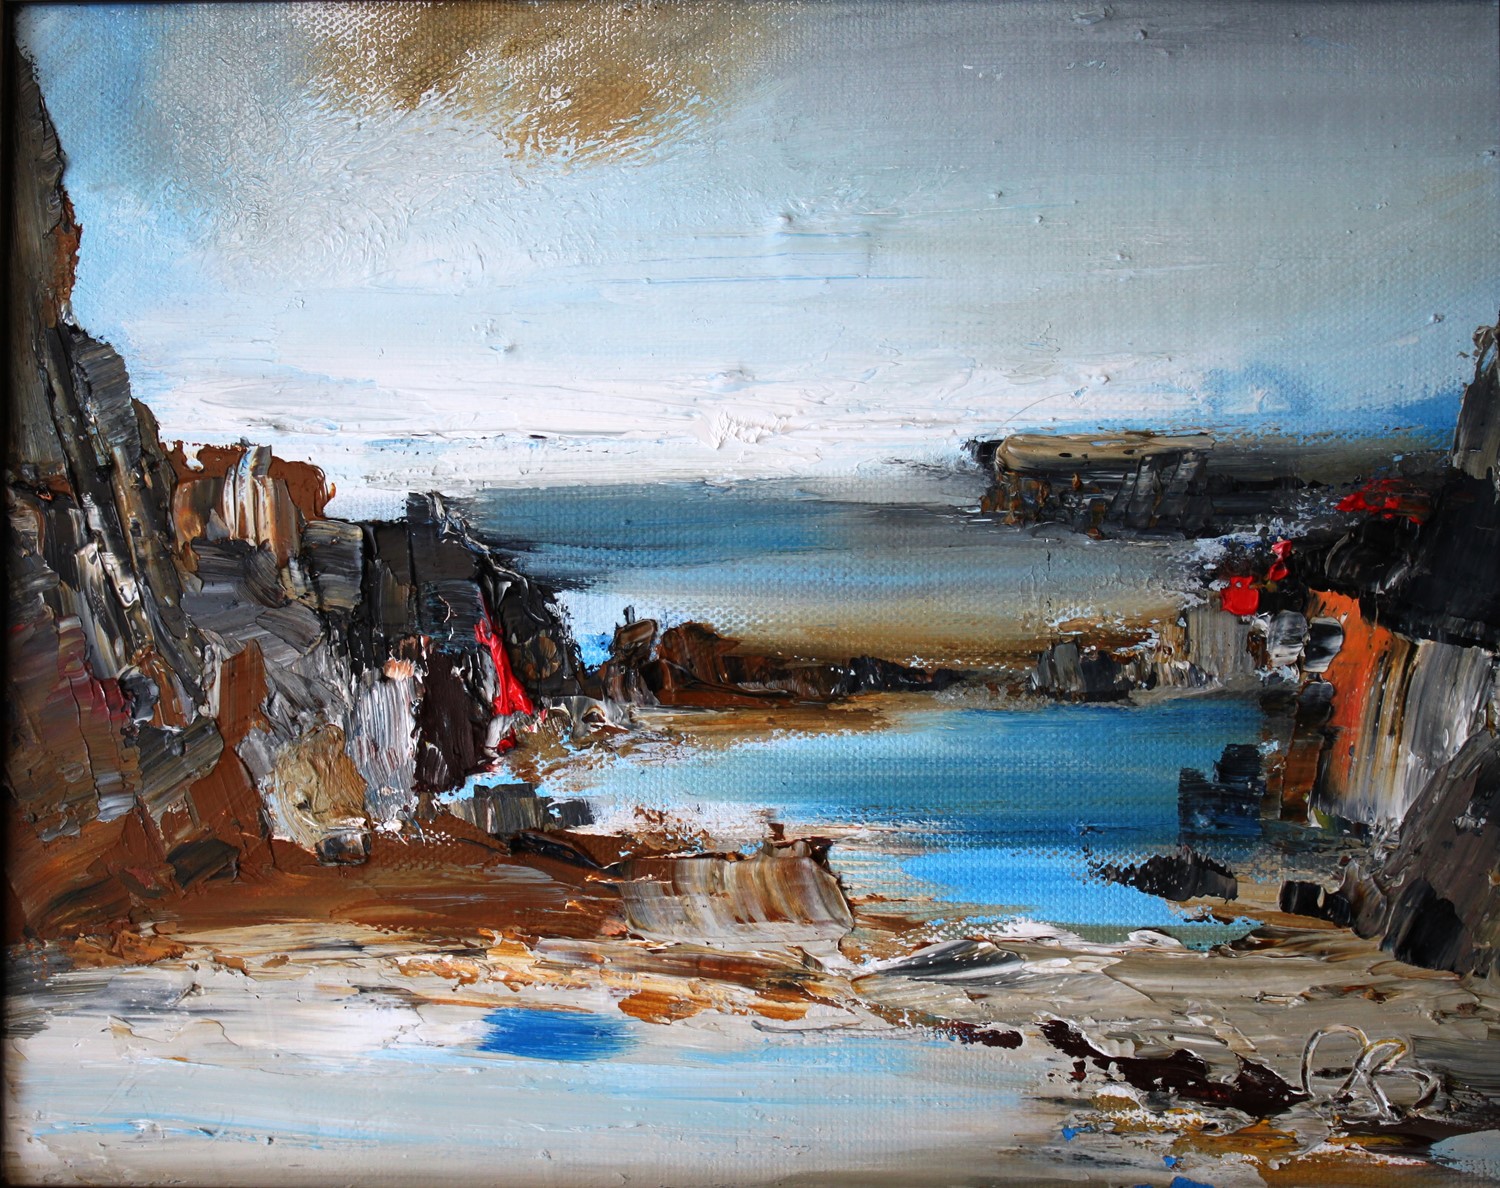 'Clambering on rocky shores' by artist Rosanne Barr